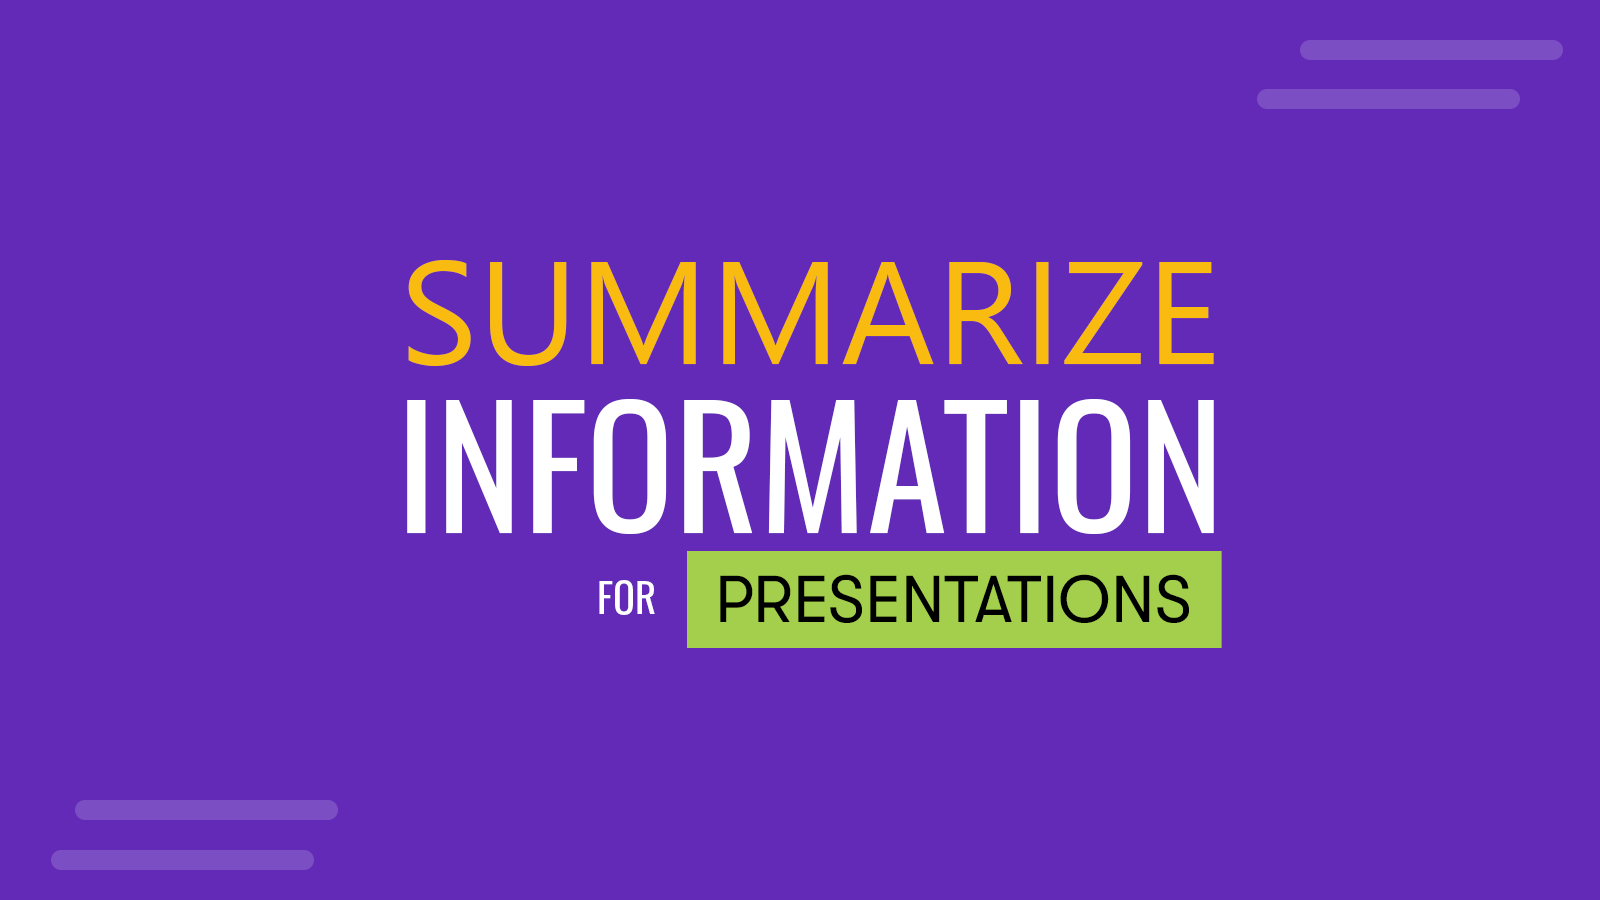 How to Summarize Information for Presentations 